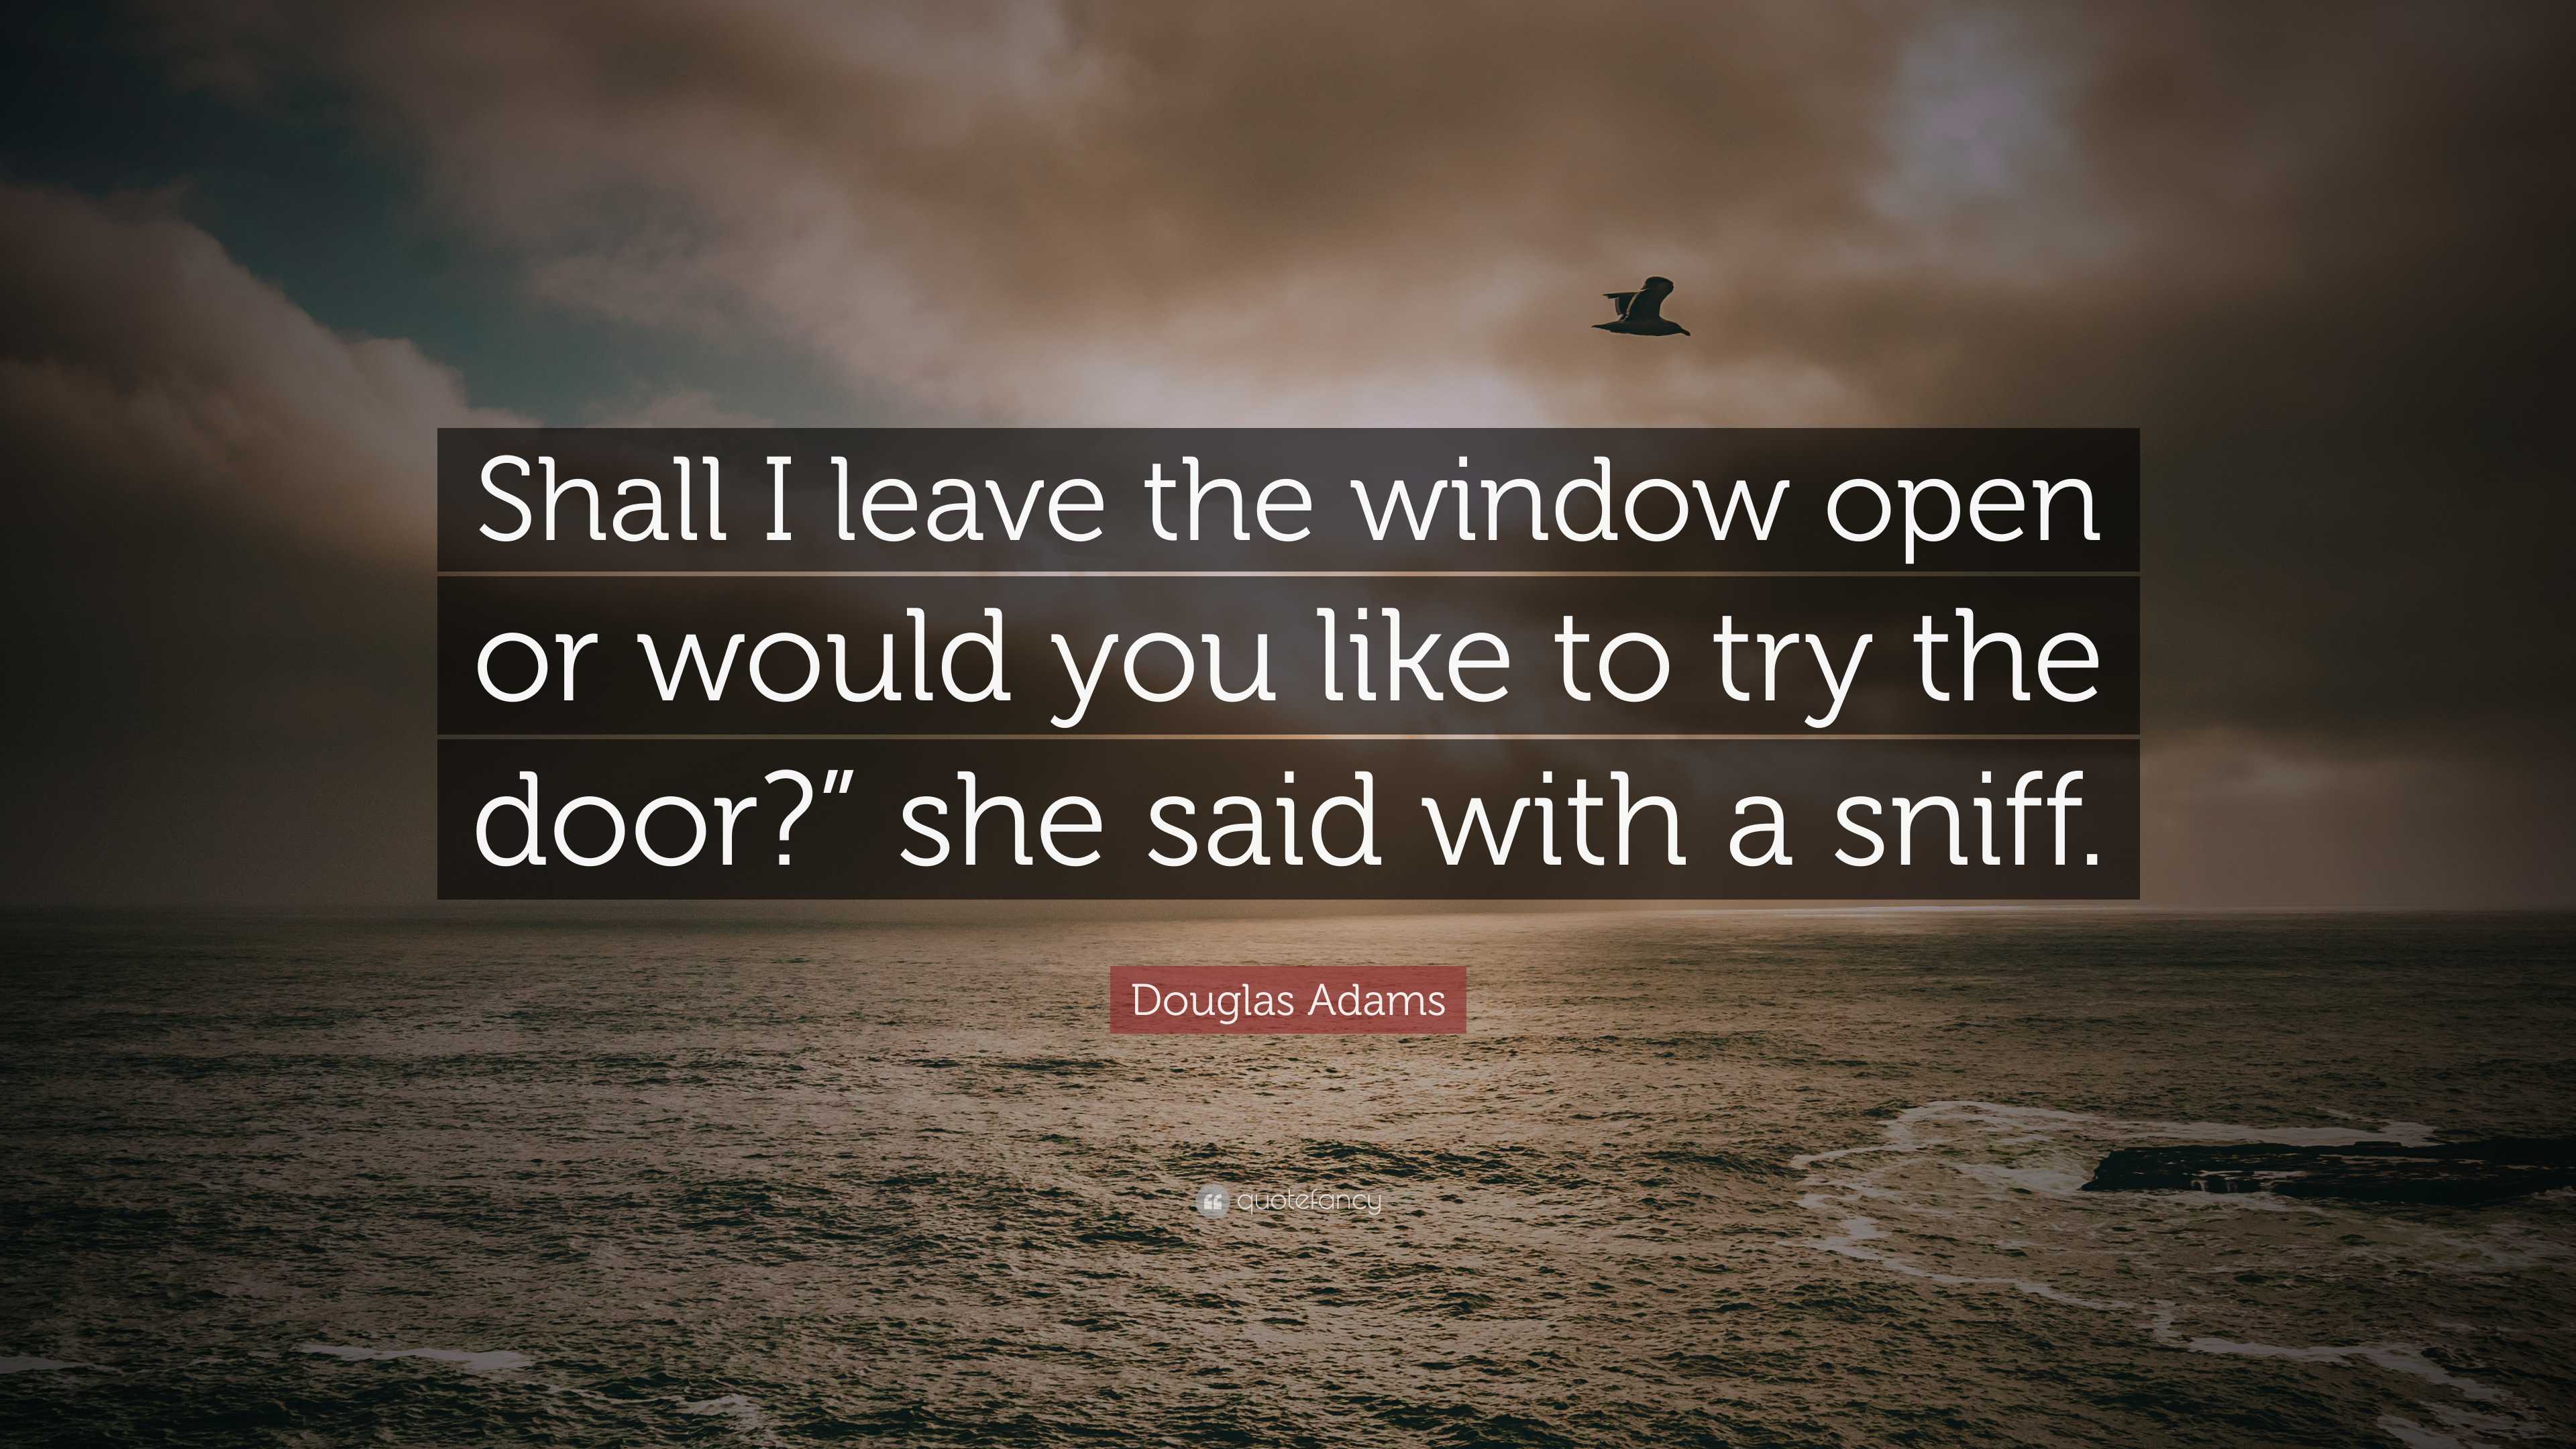 Douglas Adams Quote: “Shall I leave the window open or would you like ...